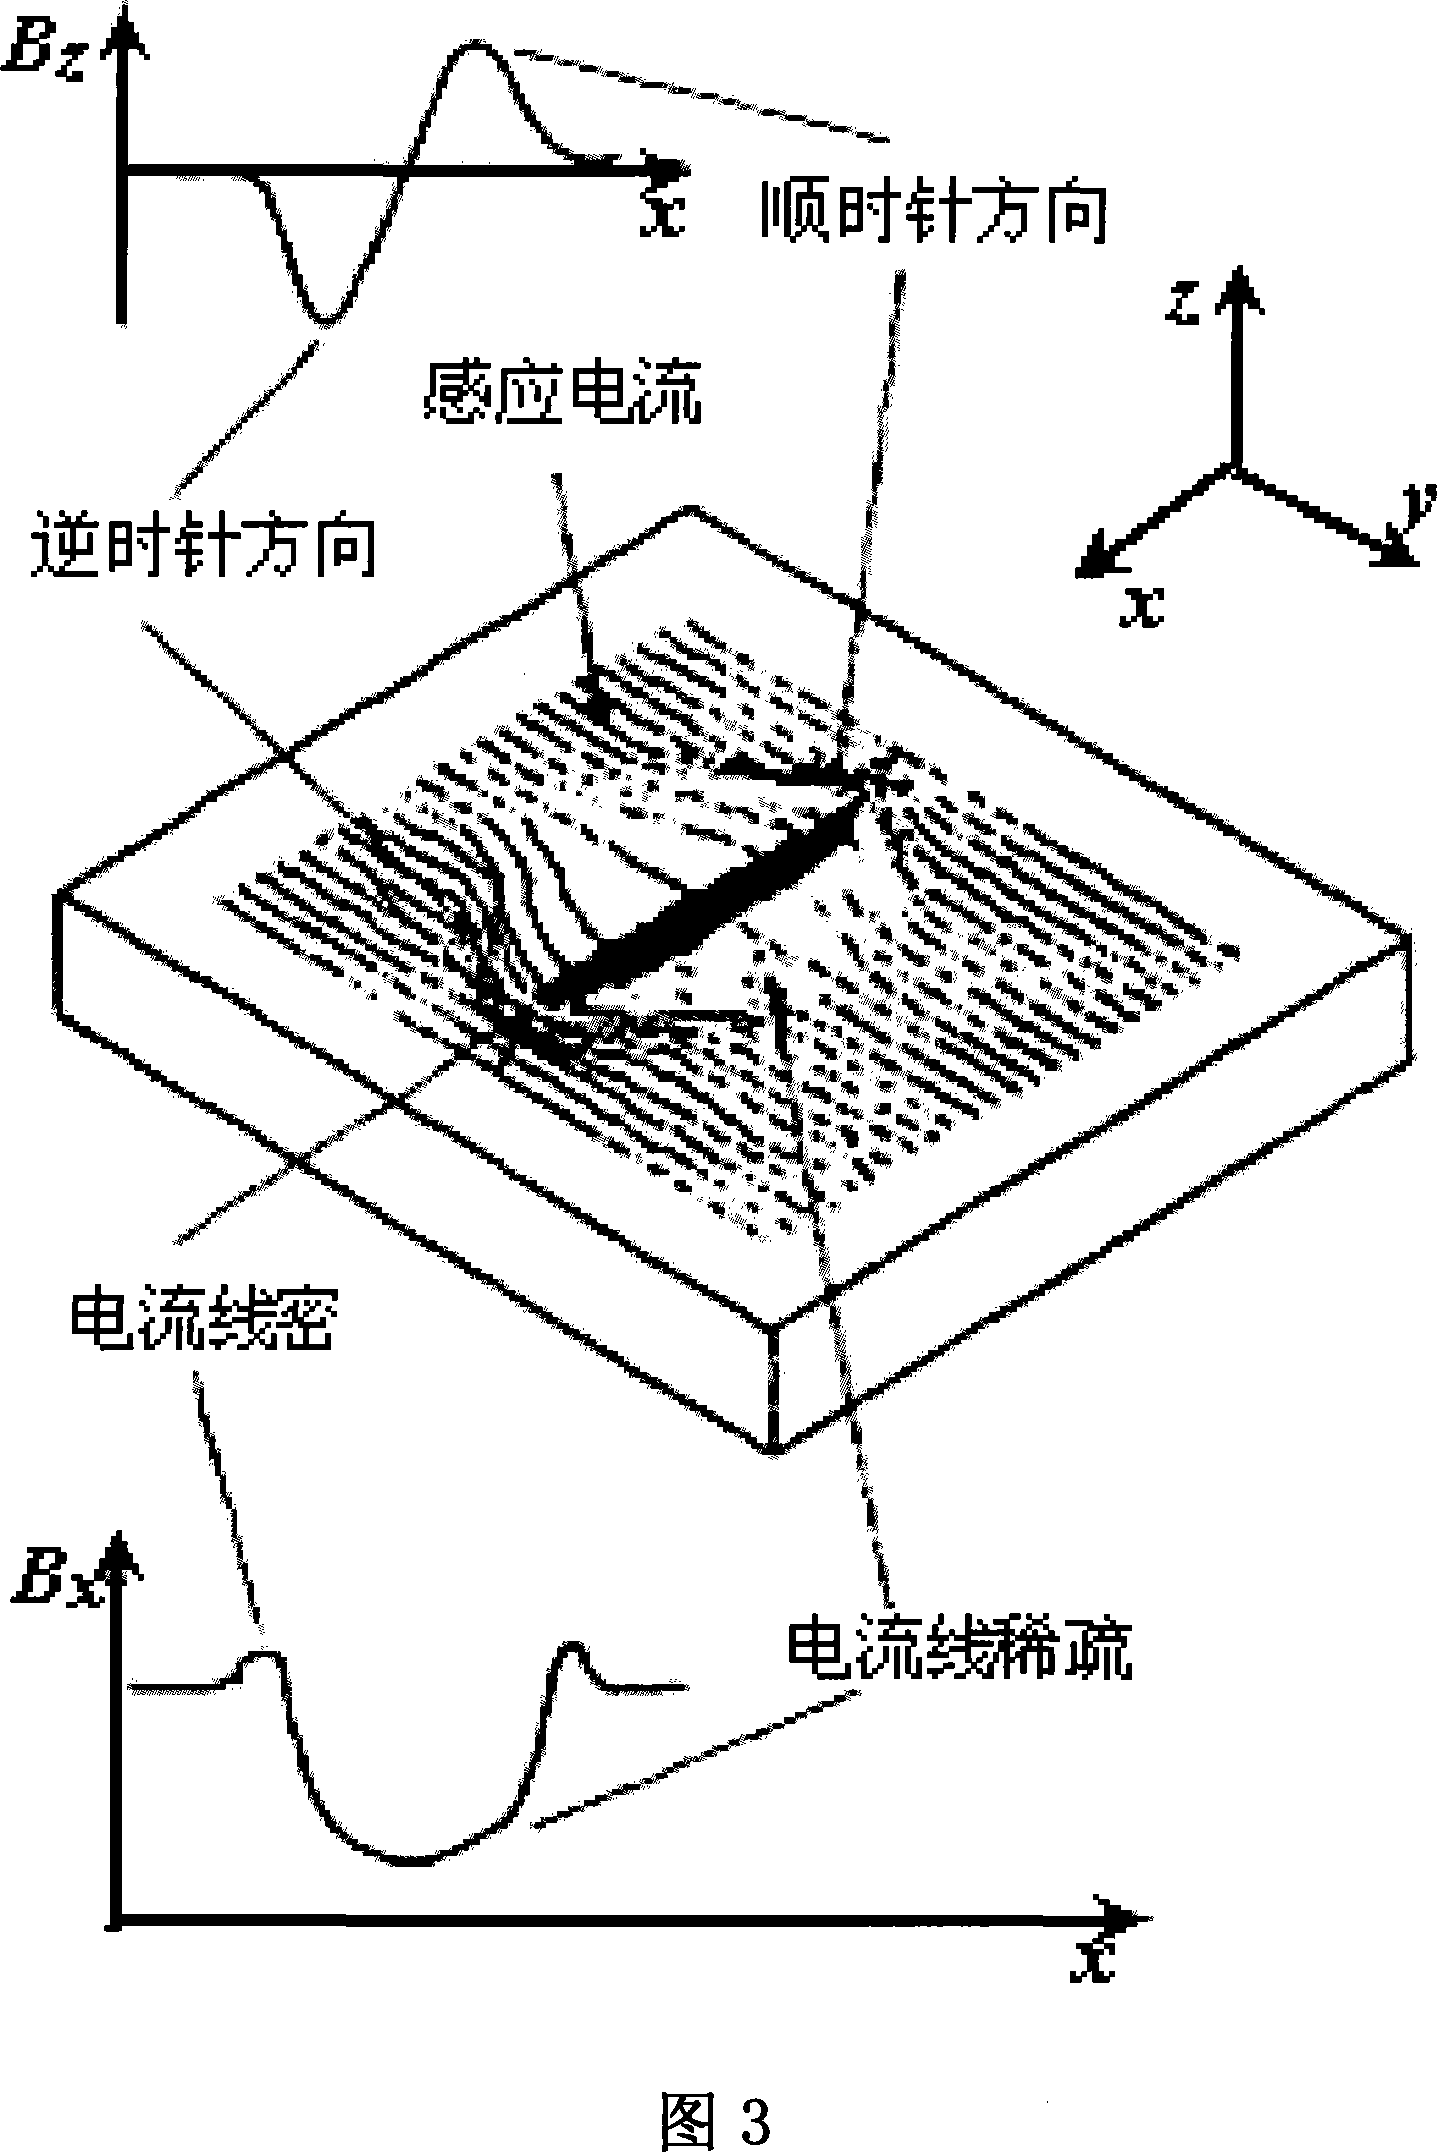 Soldering joint automatic tracking control method based on alternating field measuring technique and equipment thereof